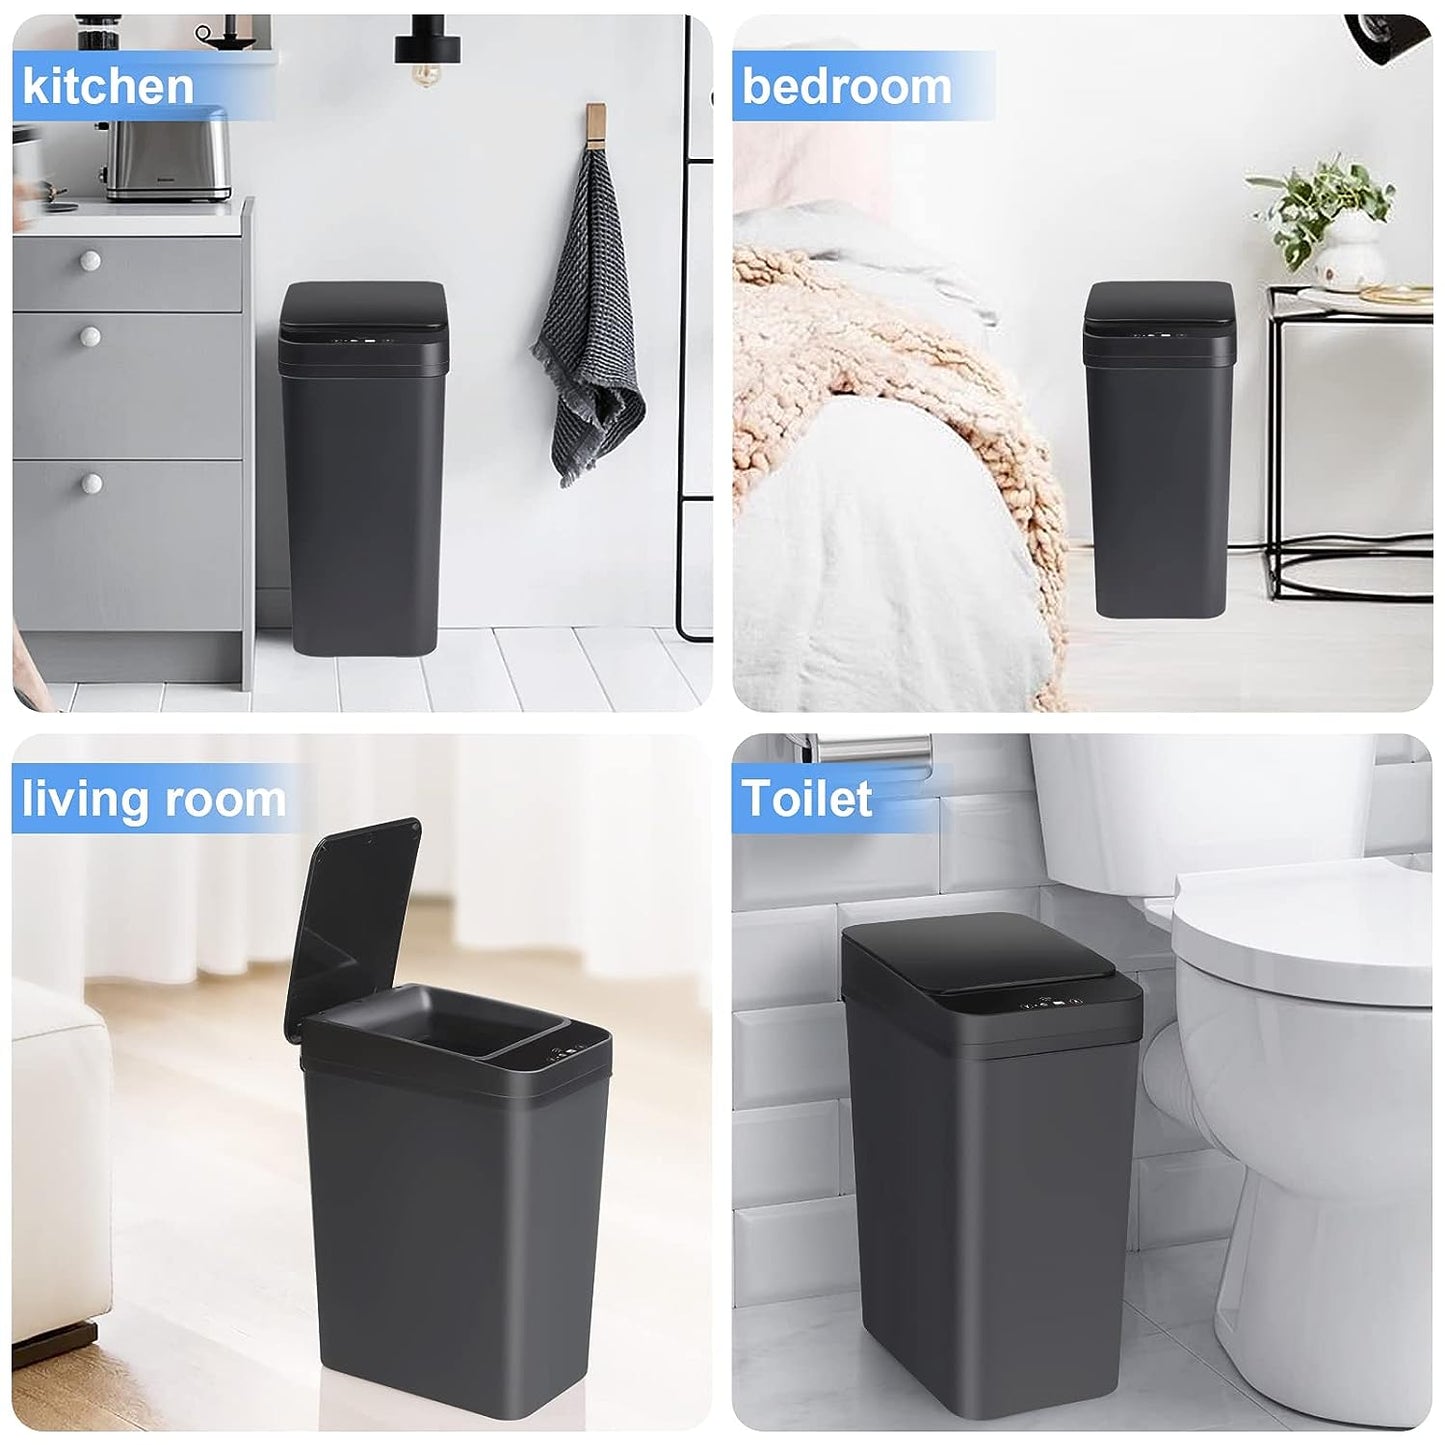 EXCELLENT Bathroom Automatic Trash Can 2 Pack 2.2 Gallon Touchless Motion Sensor Small Slim Garbage Can with Lid Smart Electric Narrow Waterproof Garbage Bin for Bedroom Office Kitchen (Black)